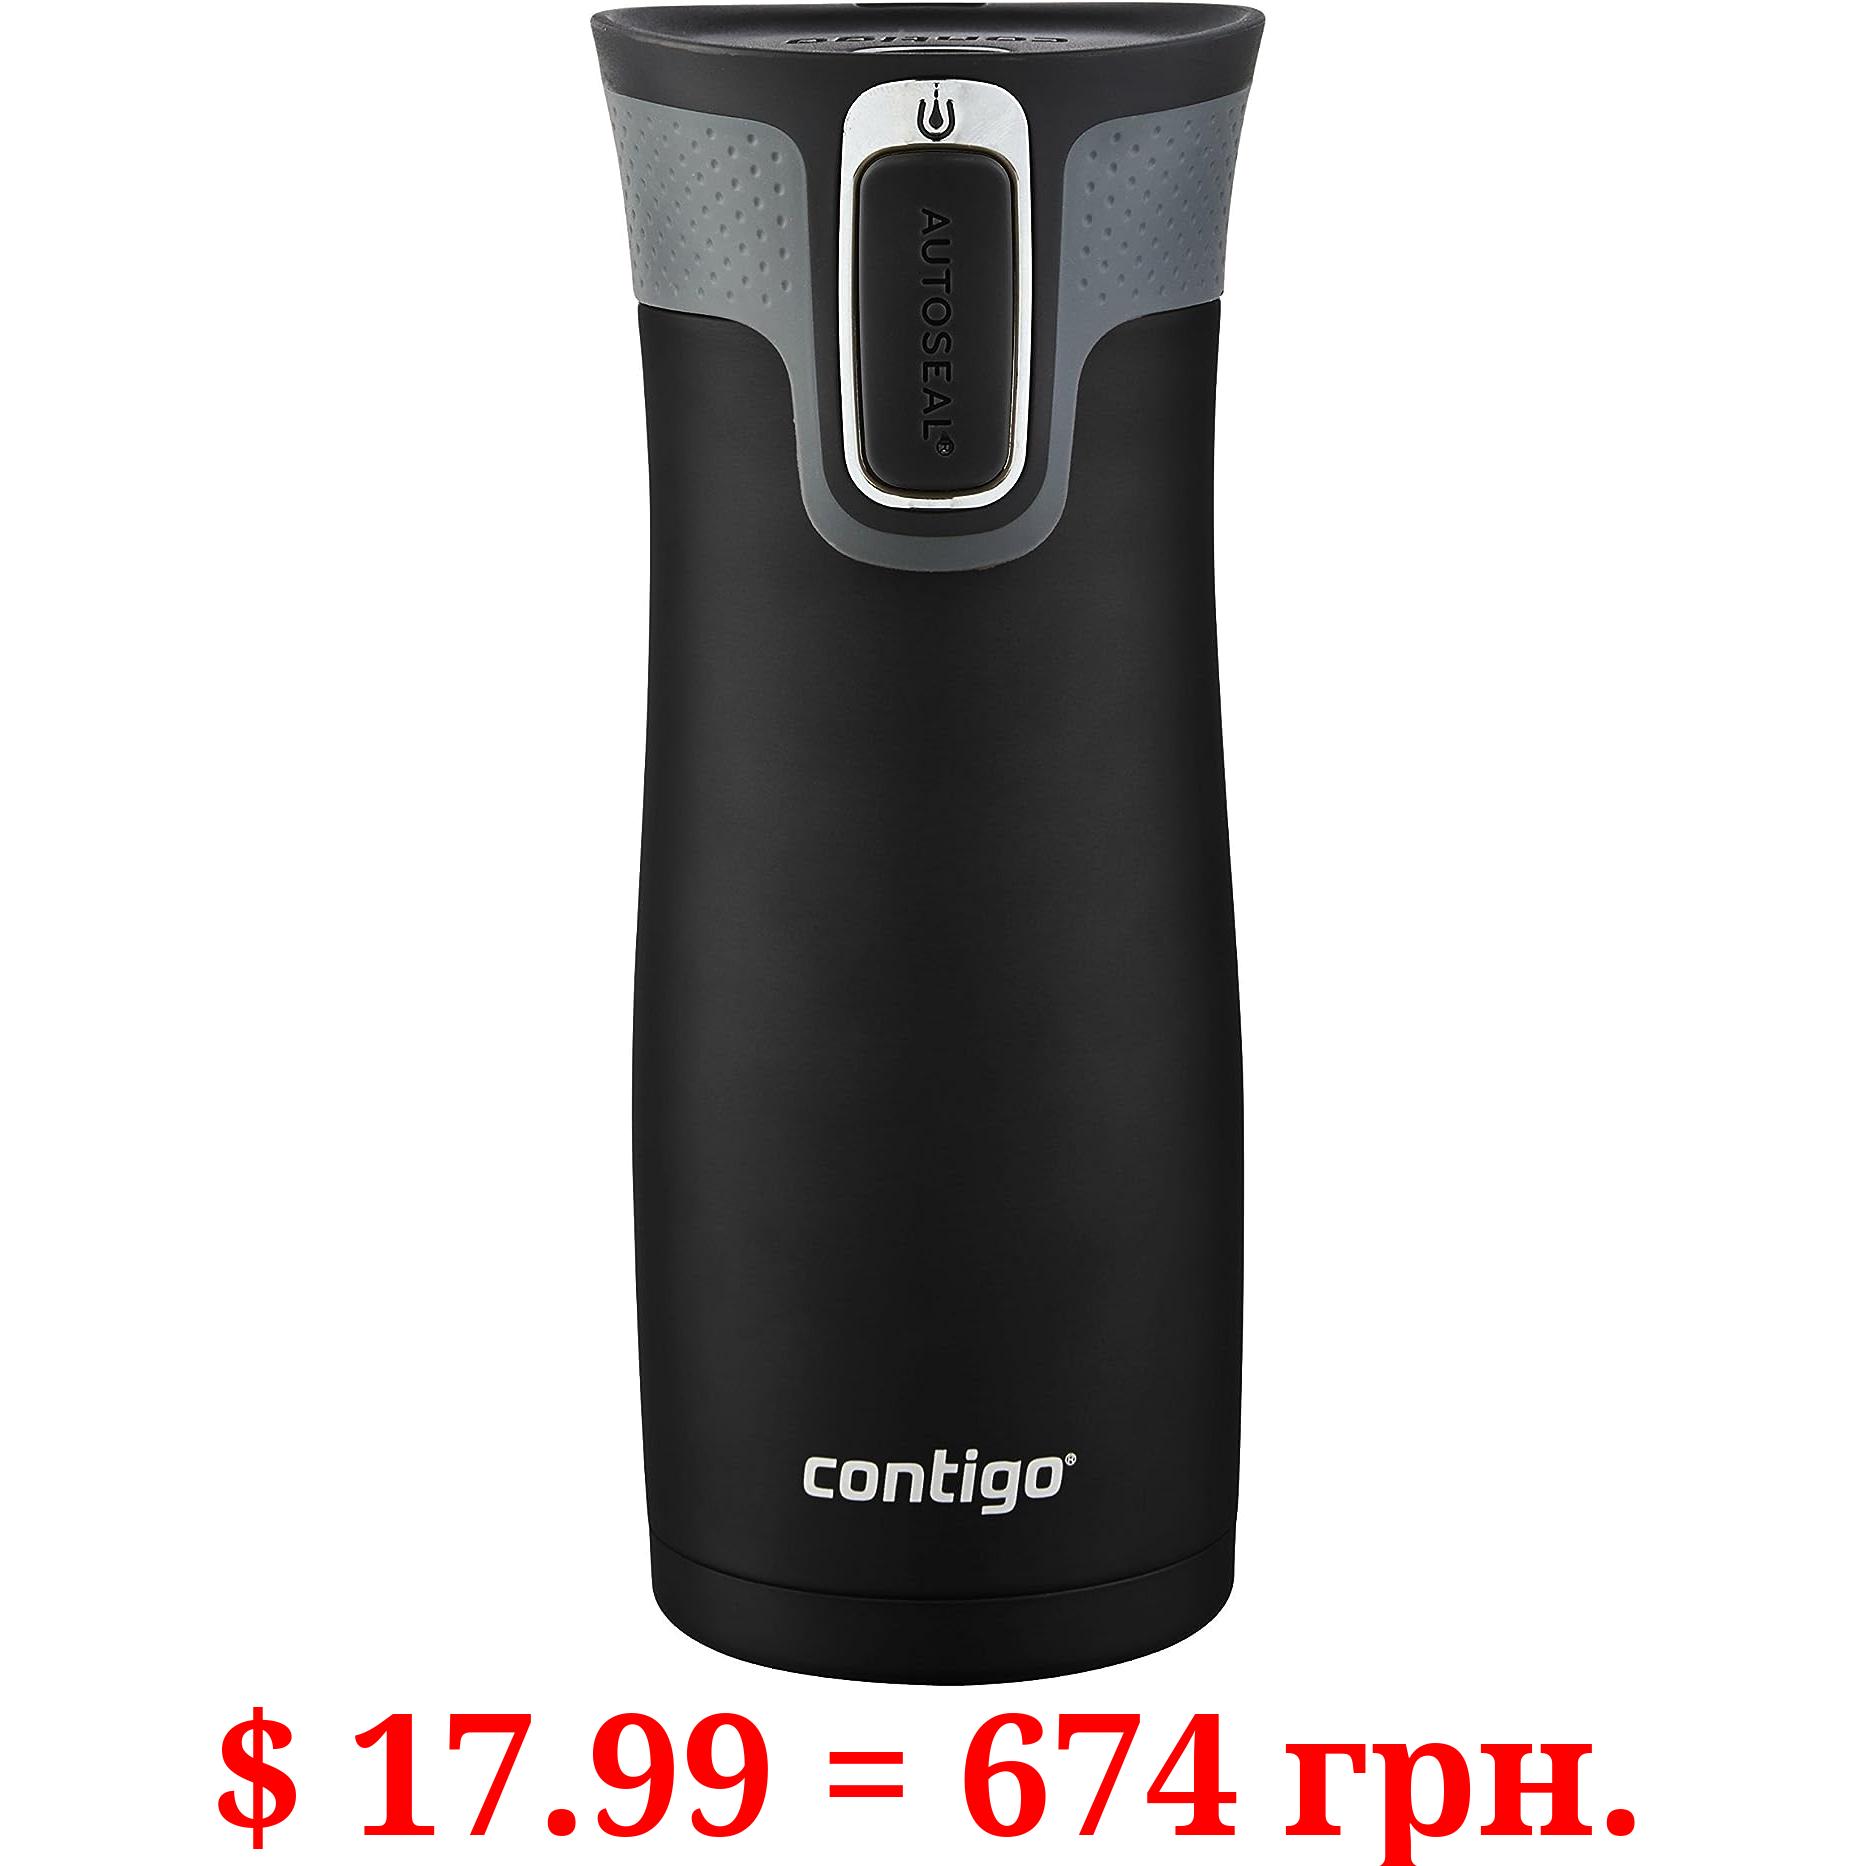 Contigo West Loop Stainless Steel Vacuum-Insulated Travel Mug with Spill-Proof Lid, Keeps Drinks Hot up to 5 Hours and Cold up to 12 Hours, 16oz Matte Black